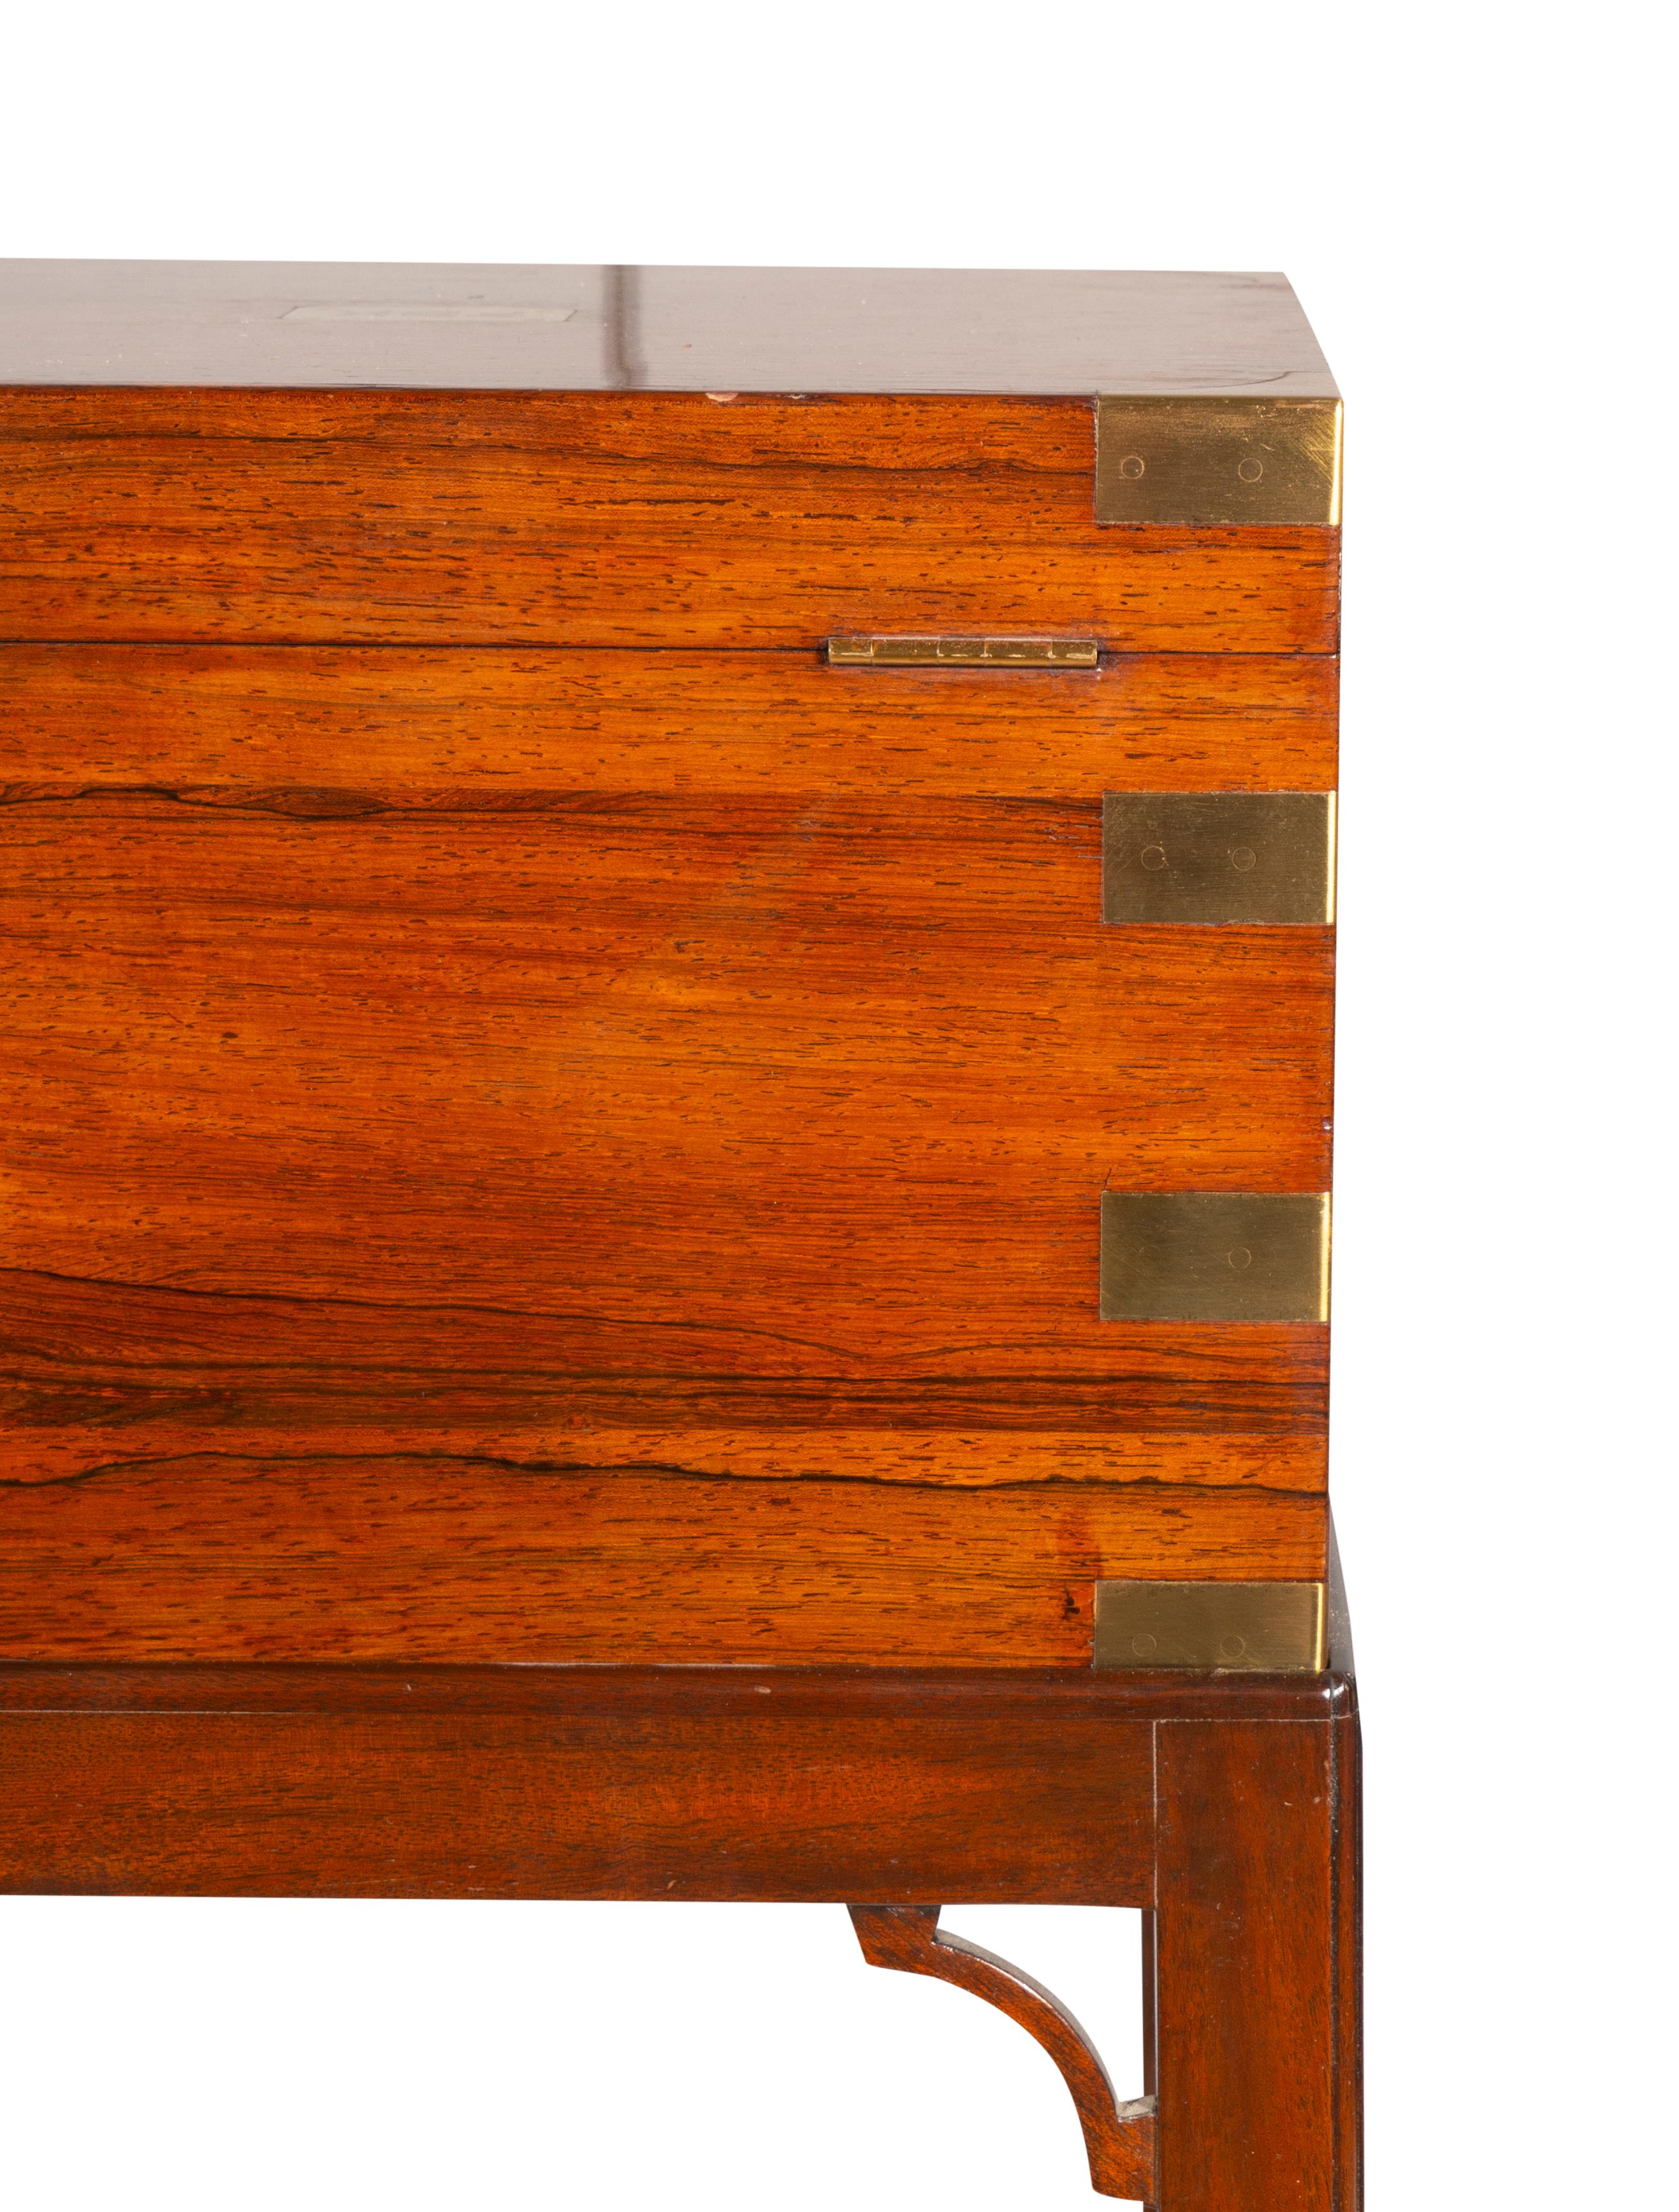 Edwardian English Rosewood And Brass Humidor On Stand For Sale